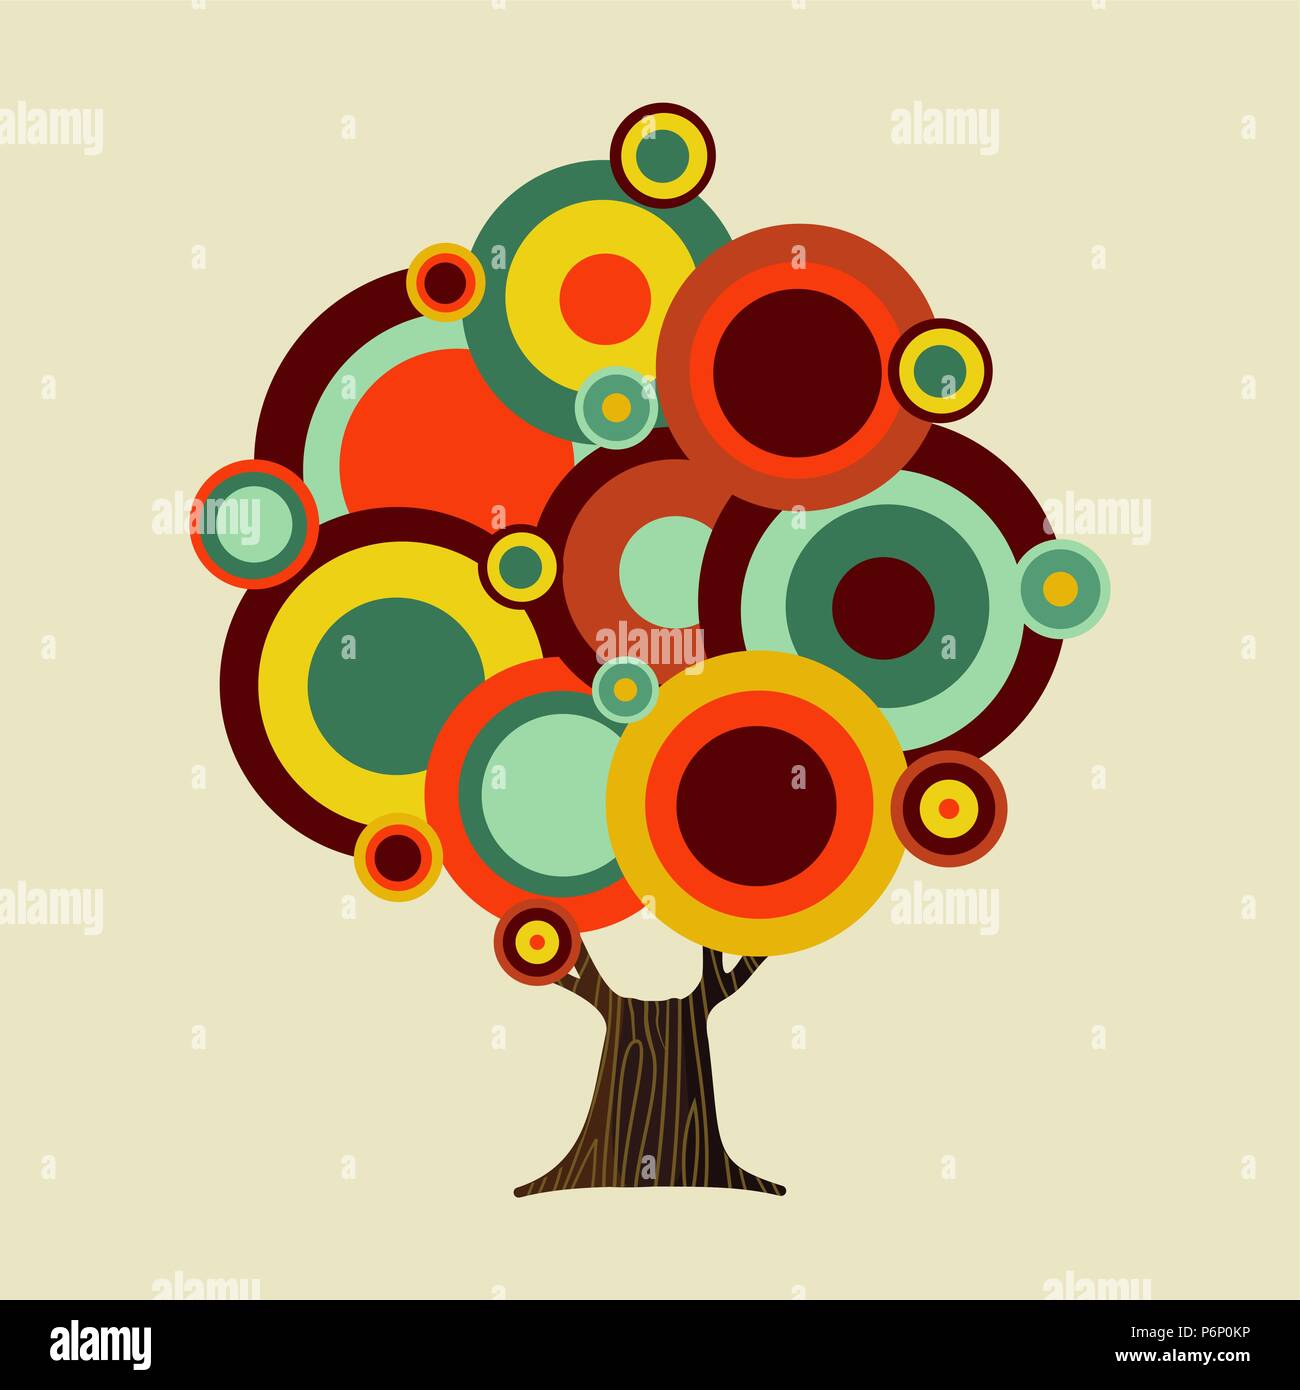 Tree made of colorful abstract shapes. Vintage color geometric texture for fun conceptual idea. EPS10 vector. Stock Vector